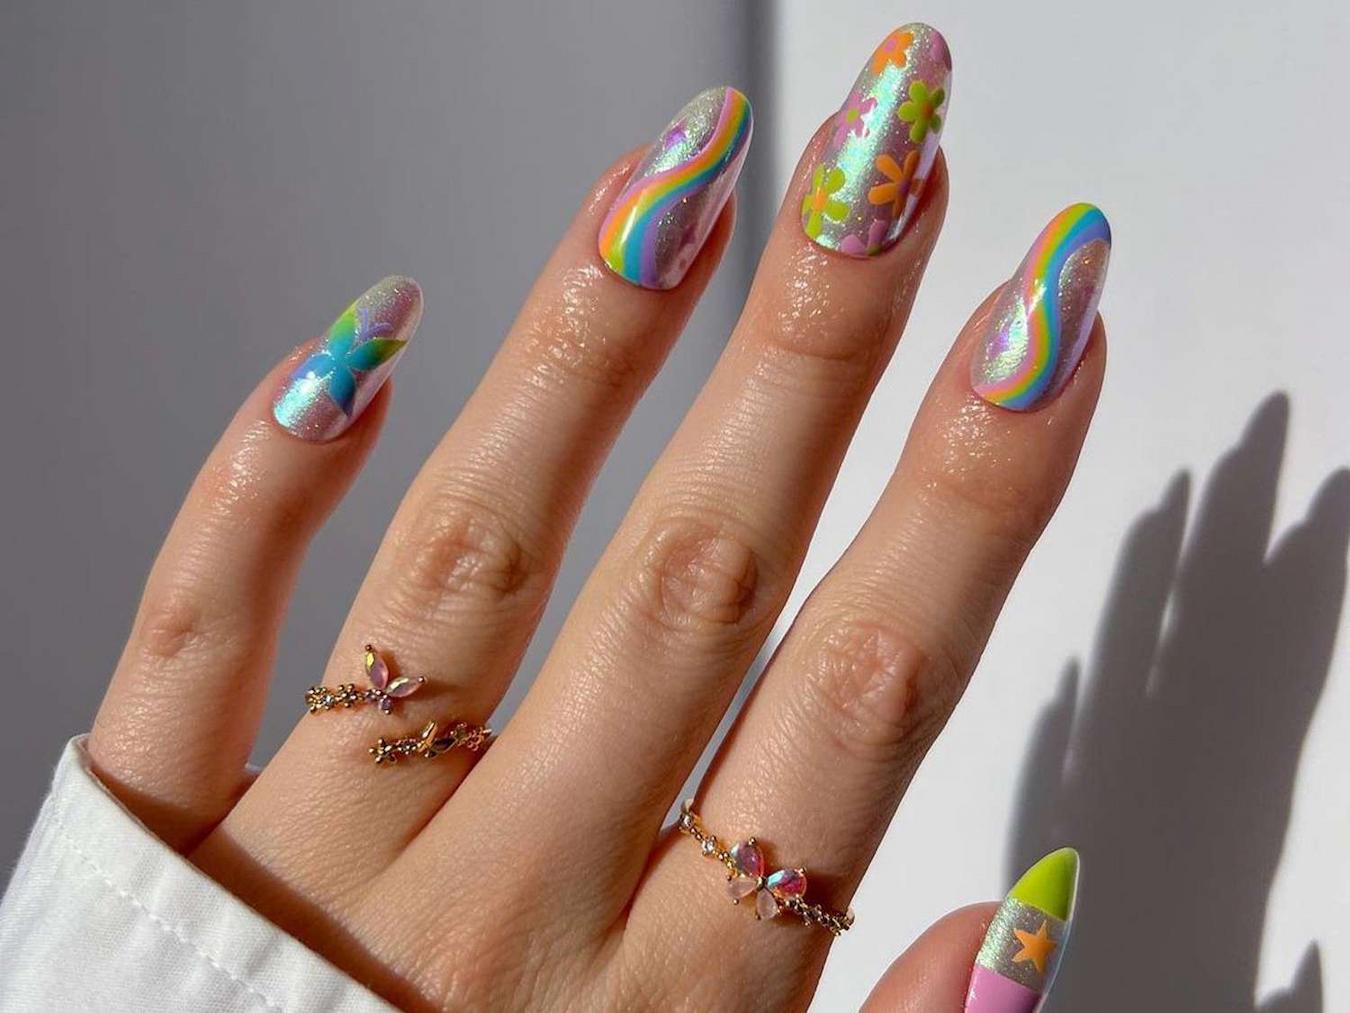 32 Nail Ideas for April That Put a Fresh Twist on Spring Manicures